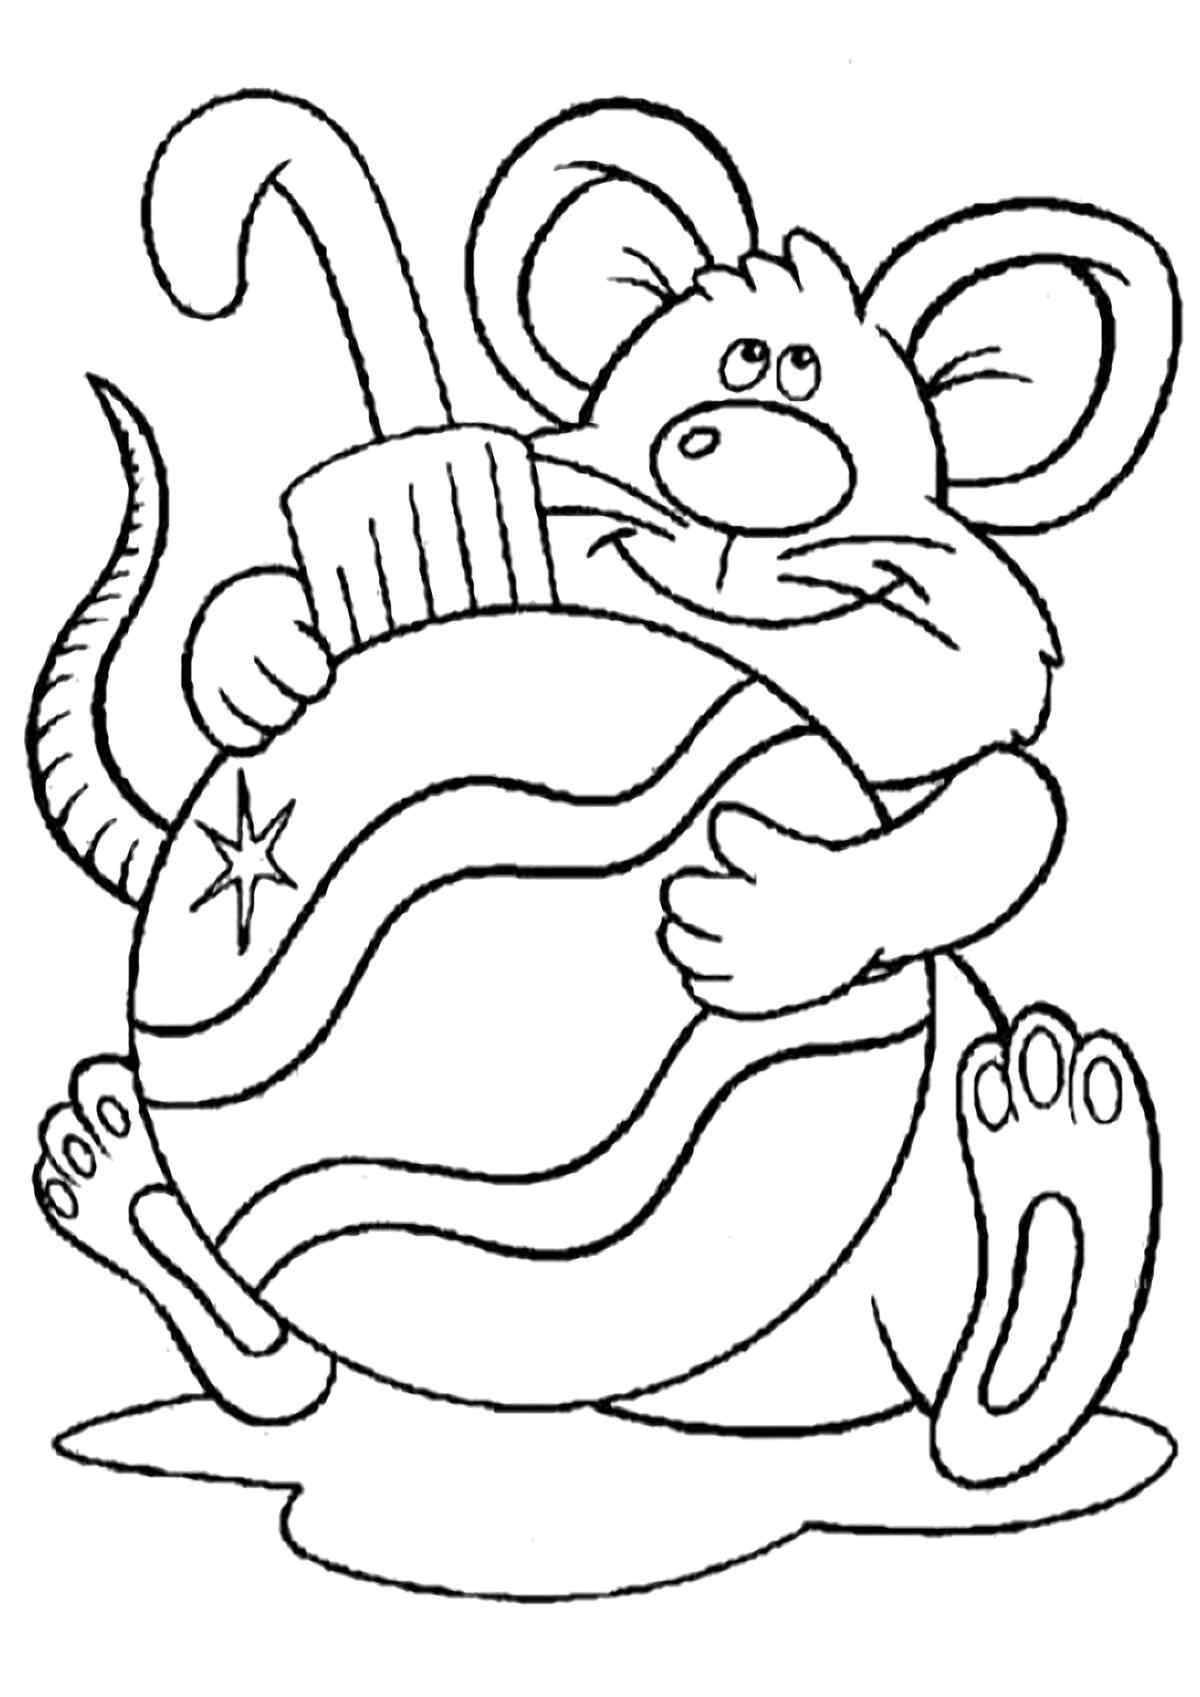 The Little Mouse is Also Preparing For Christmas Coloring Page